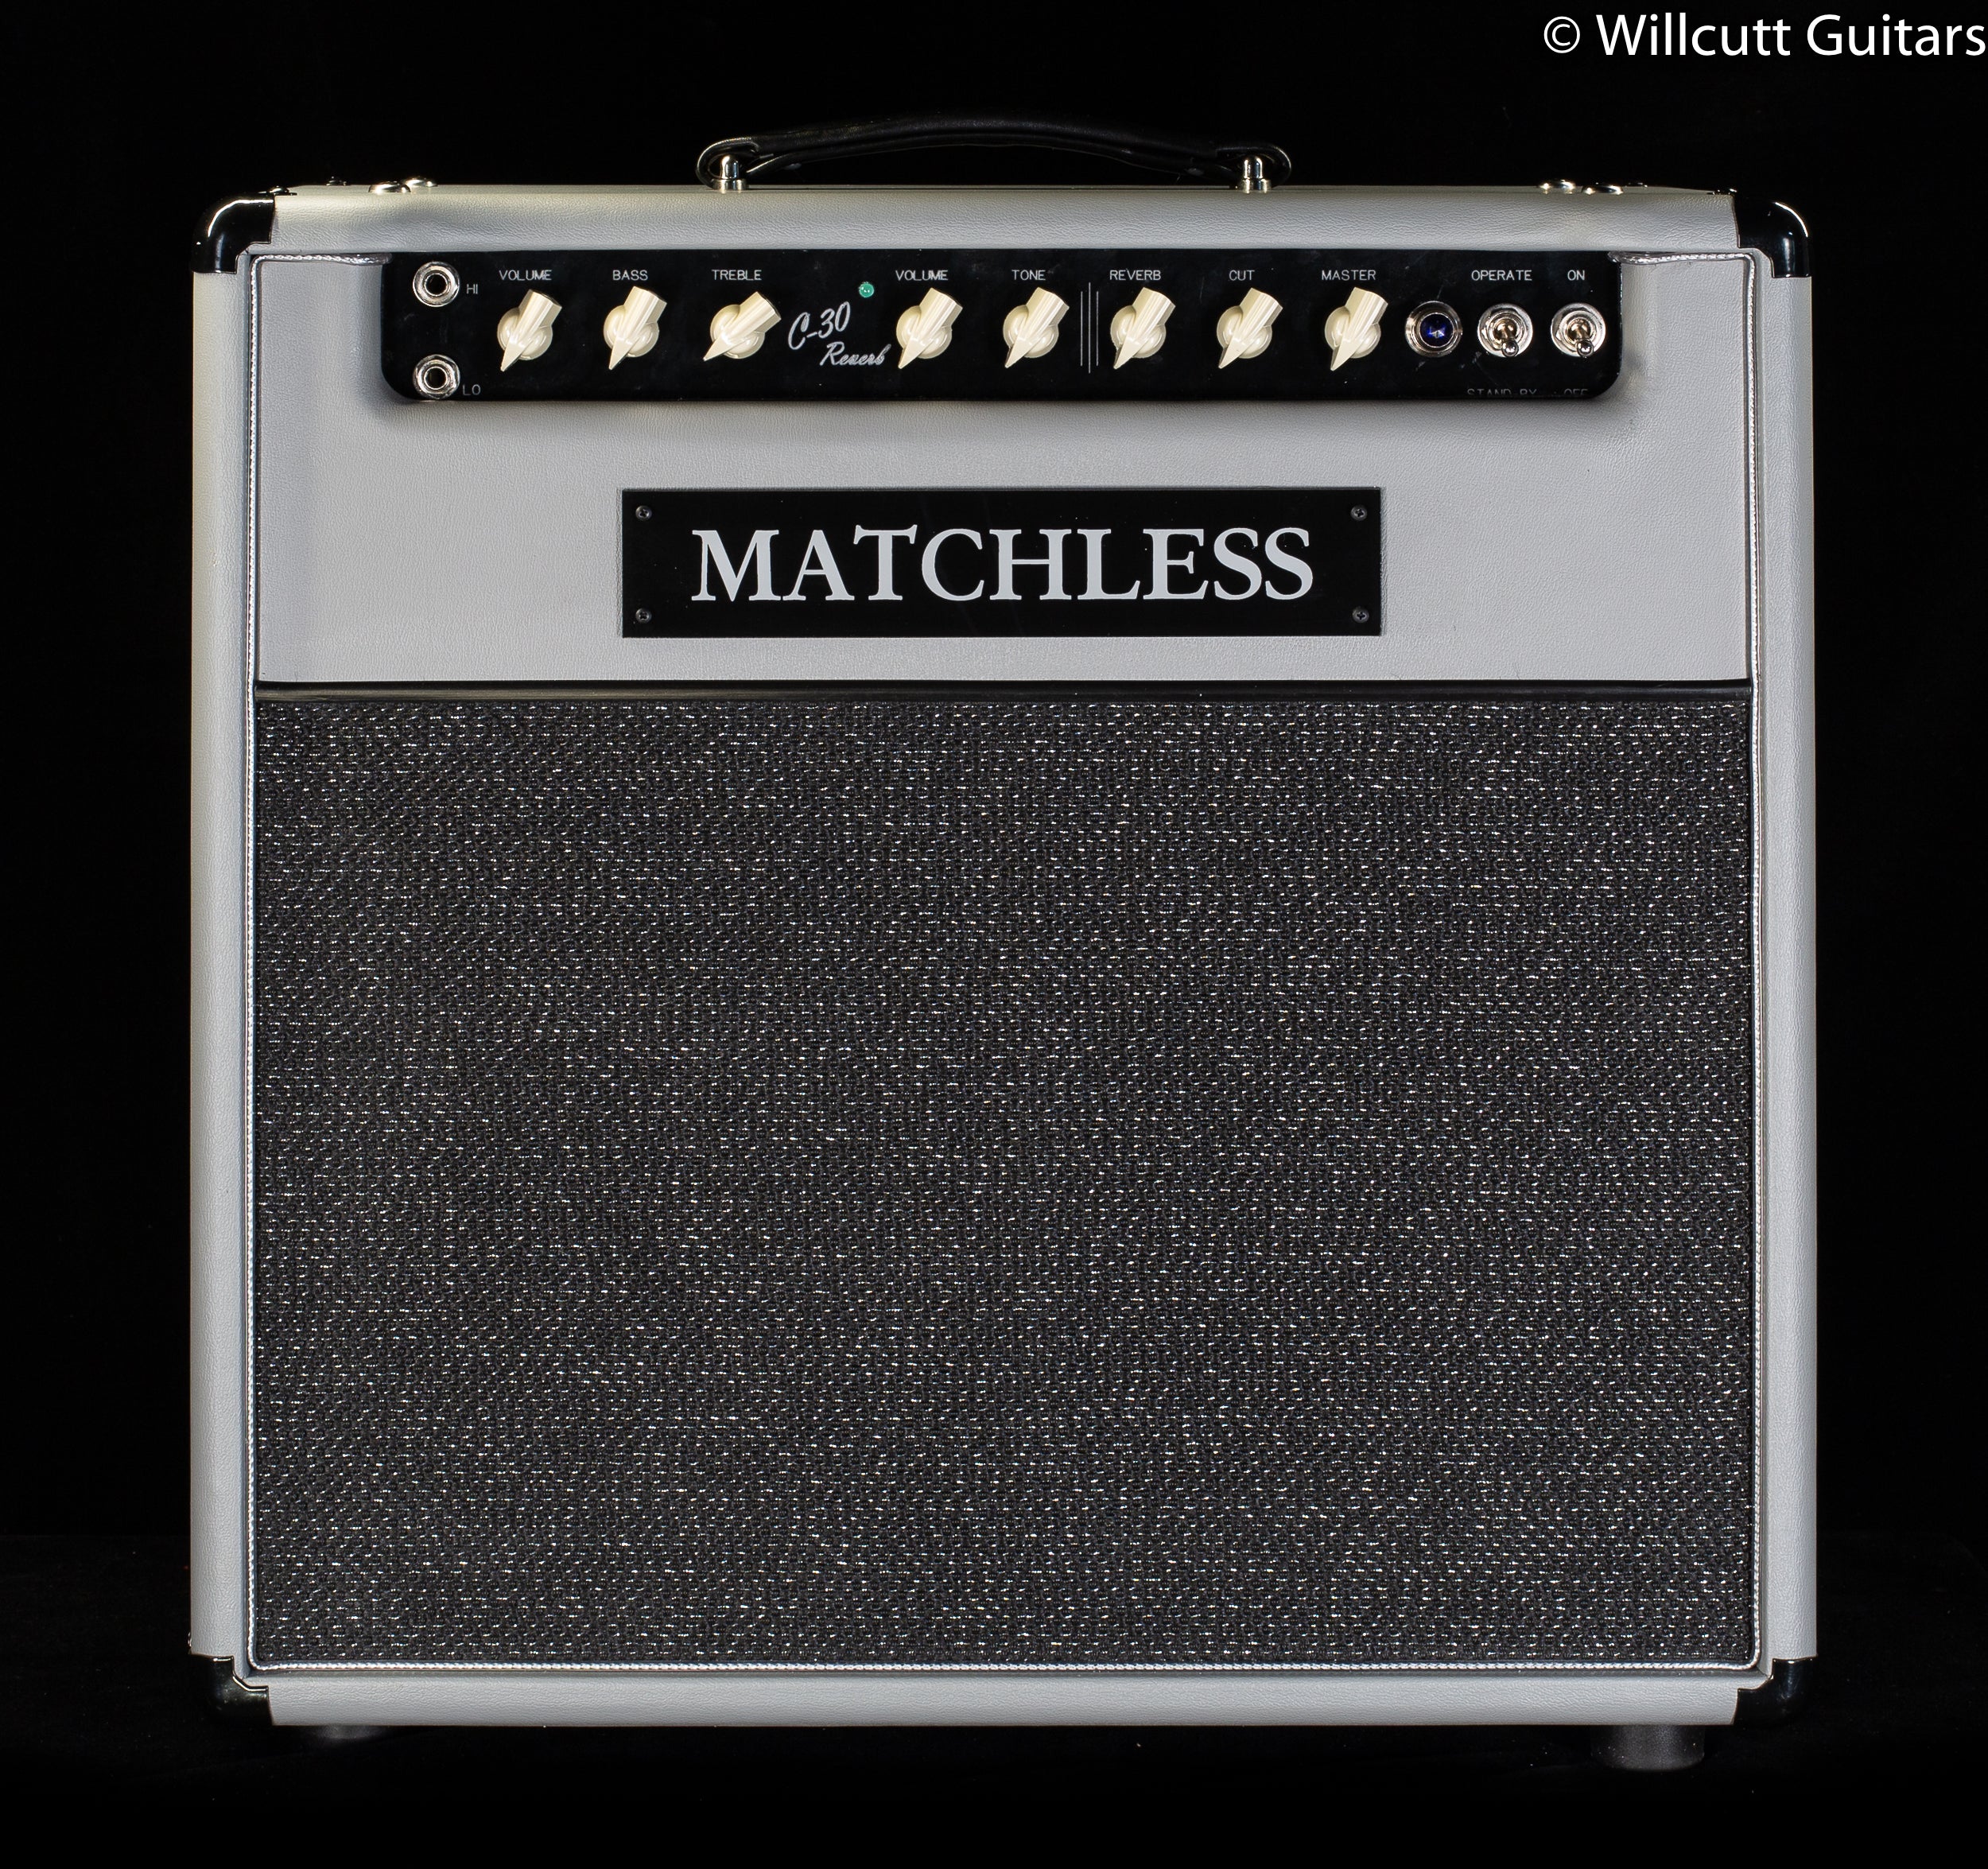 Matchless SC-30 112 Combo with Reverb, Dark Grey Silver - Willcutt